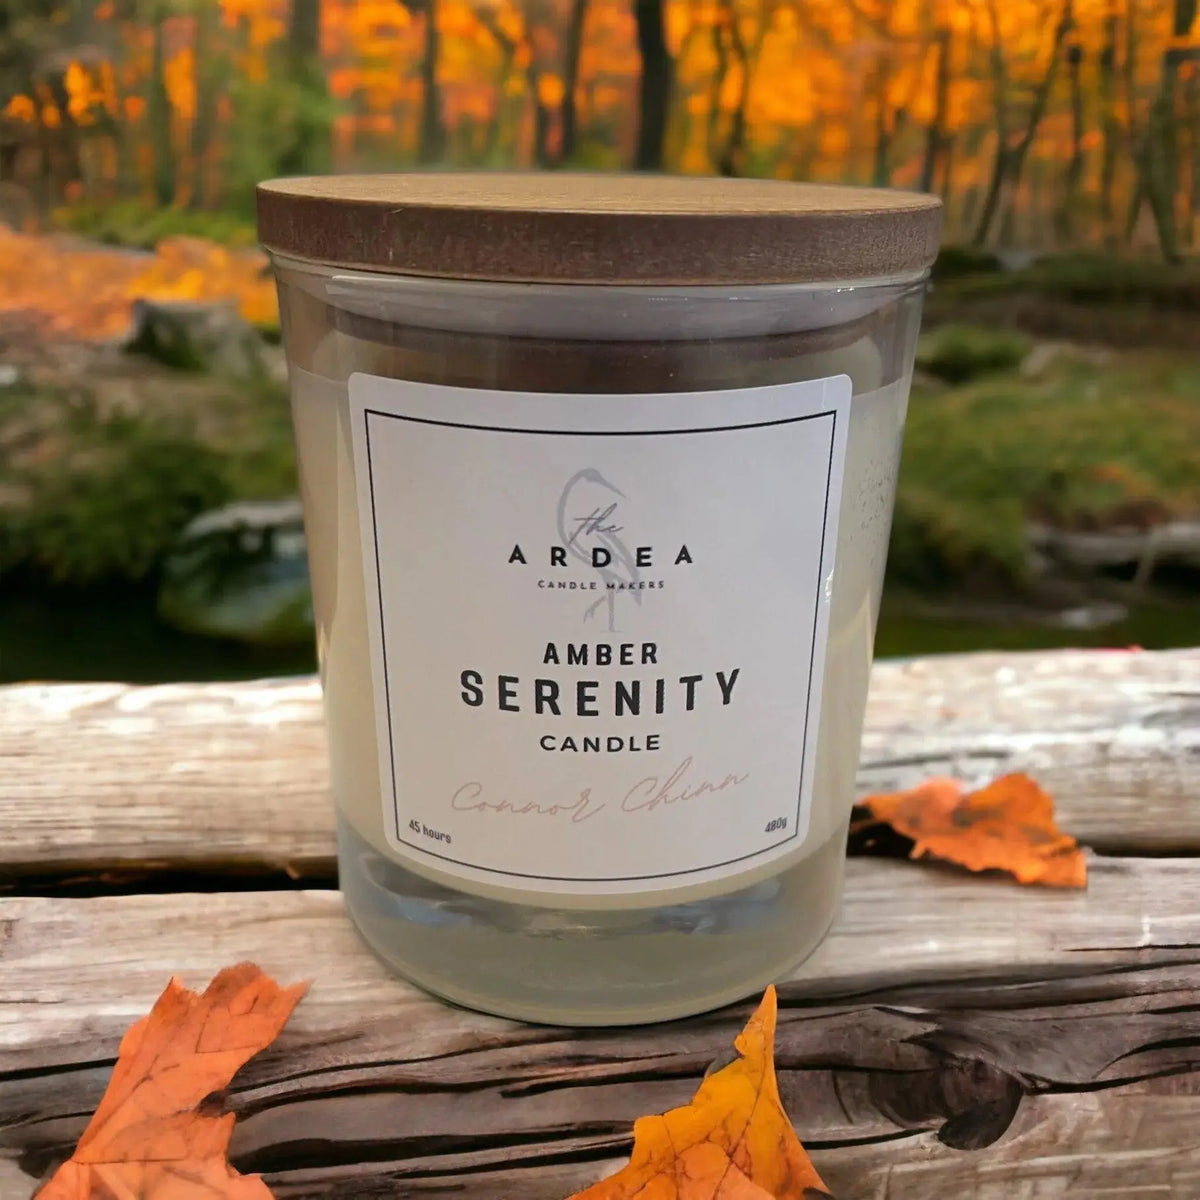 Amber Serenity Candle - 420g - The Ardea Candle Makers